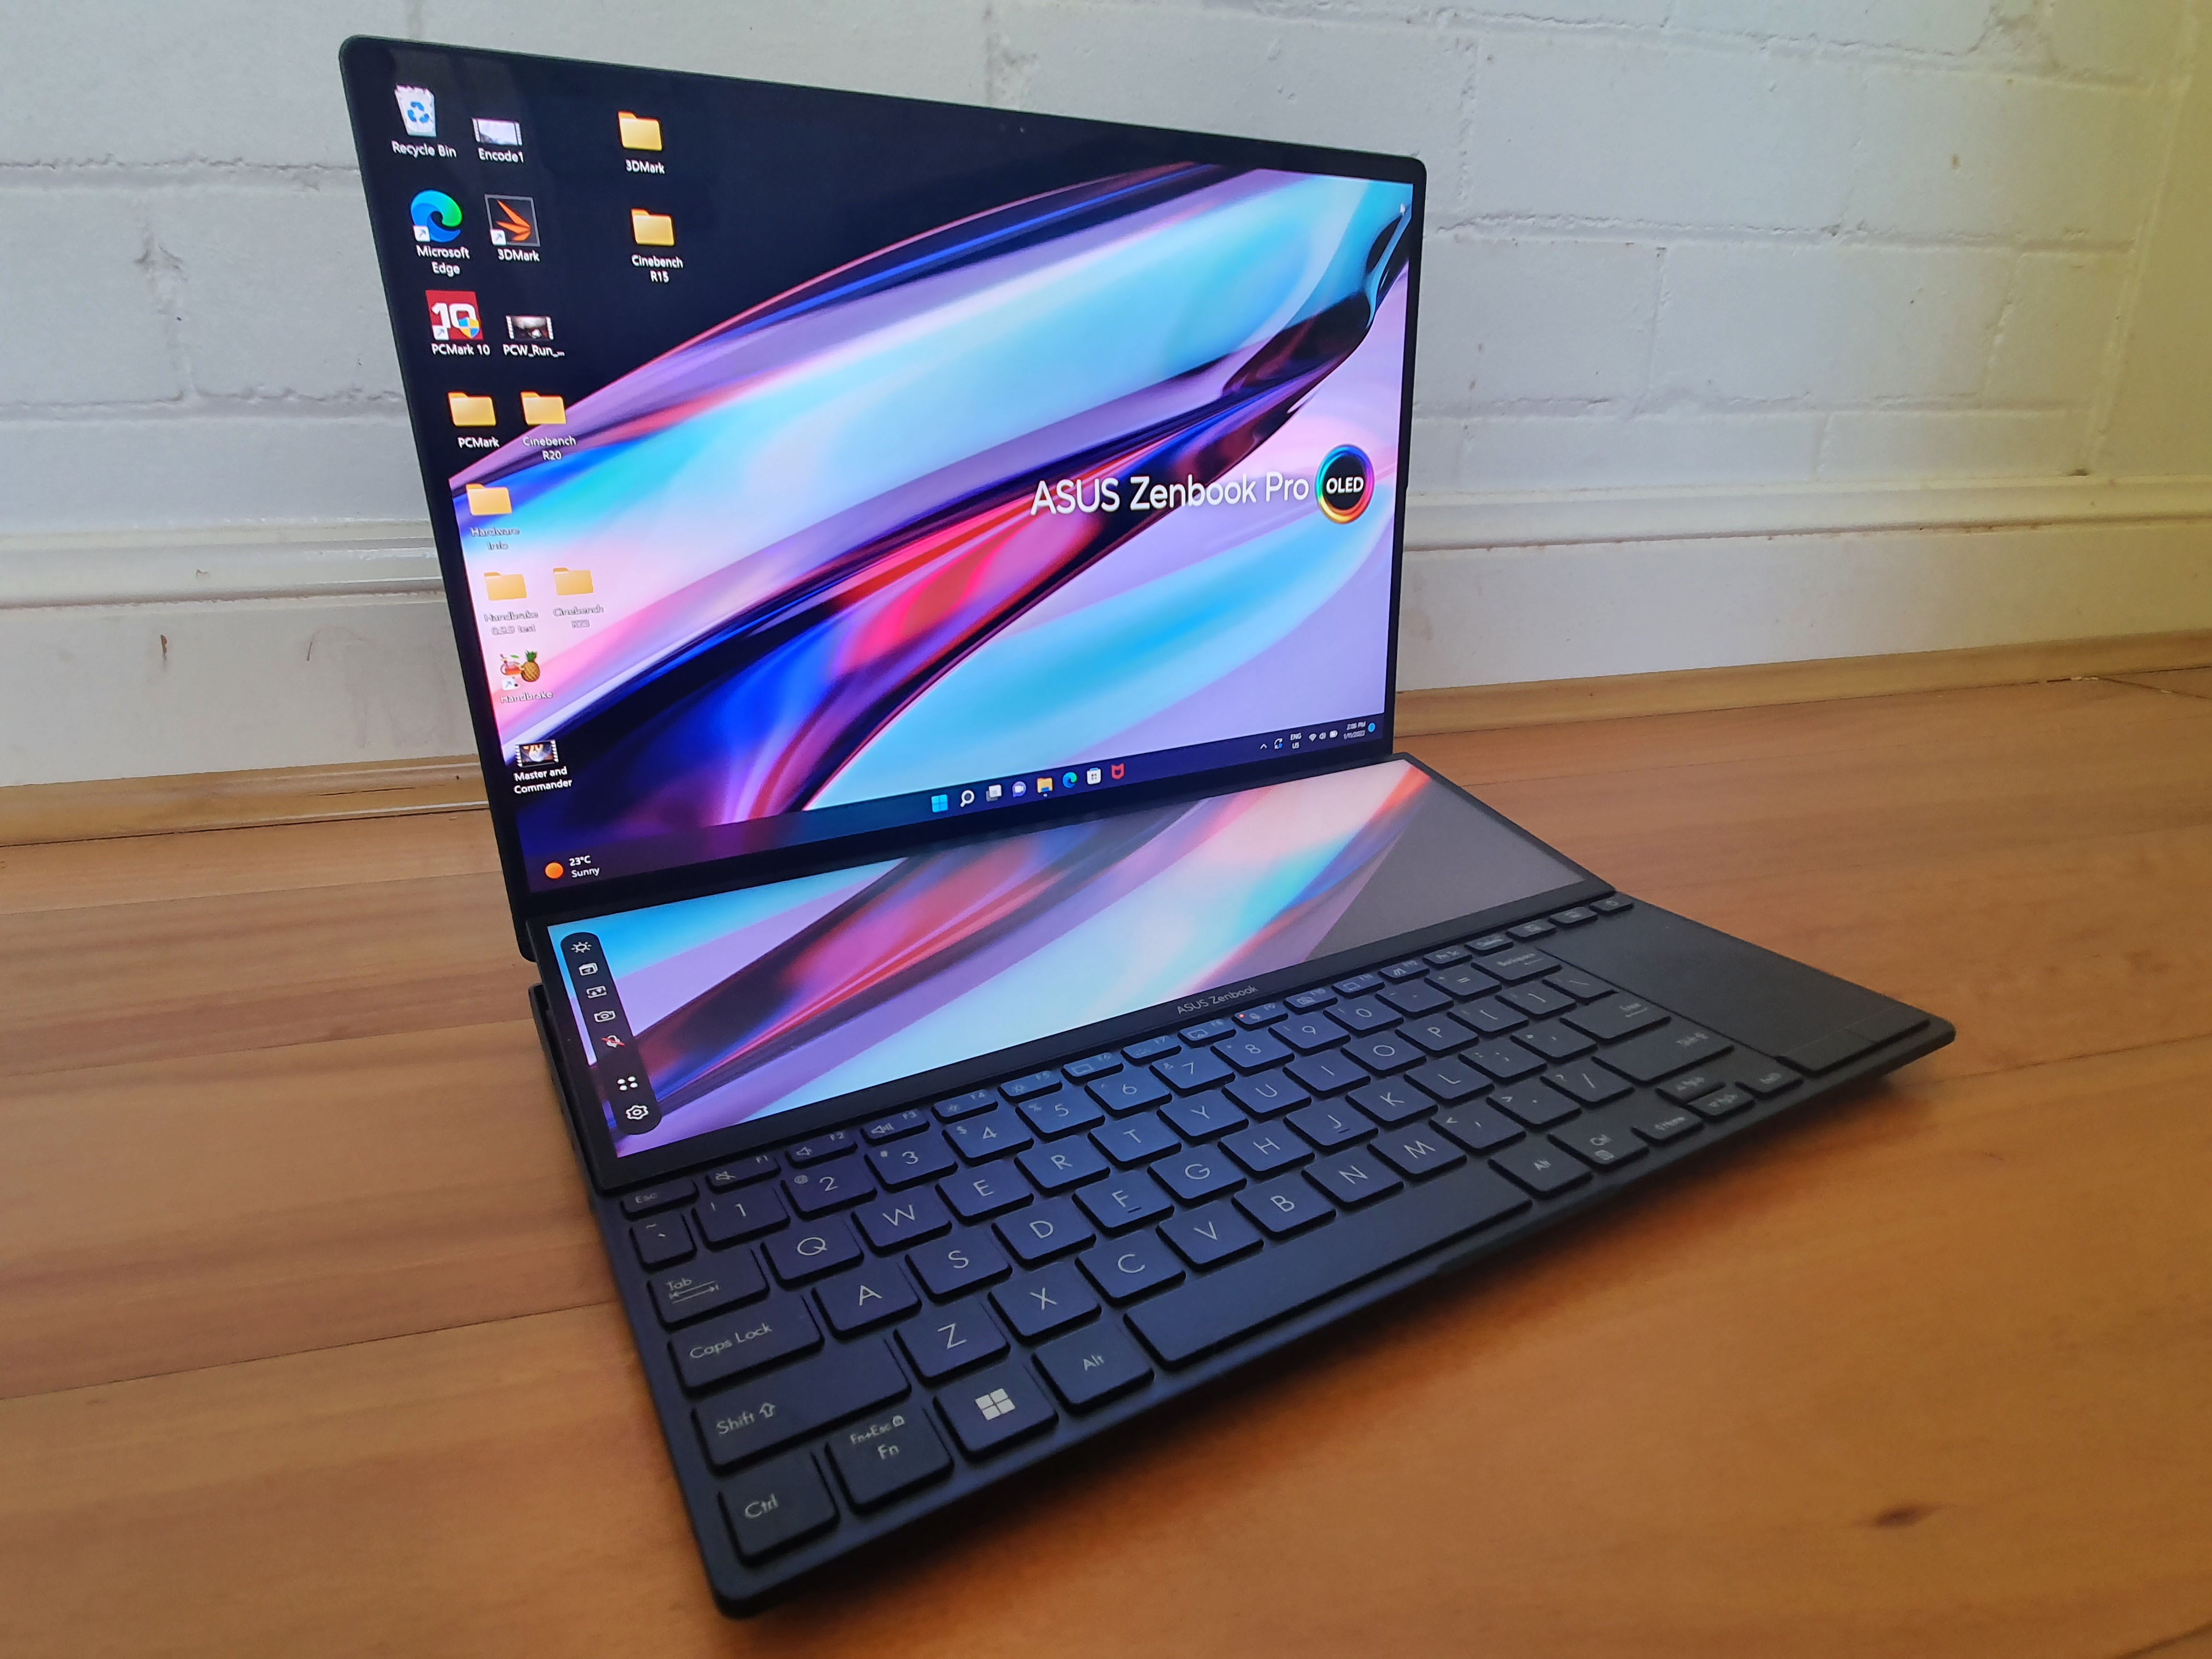 Asus Zenbook Pro 14 Duo OLED - the best dual screen